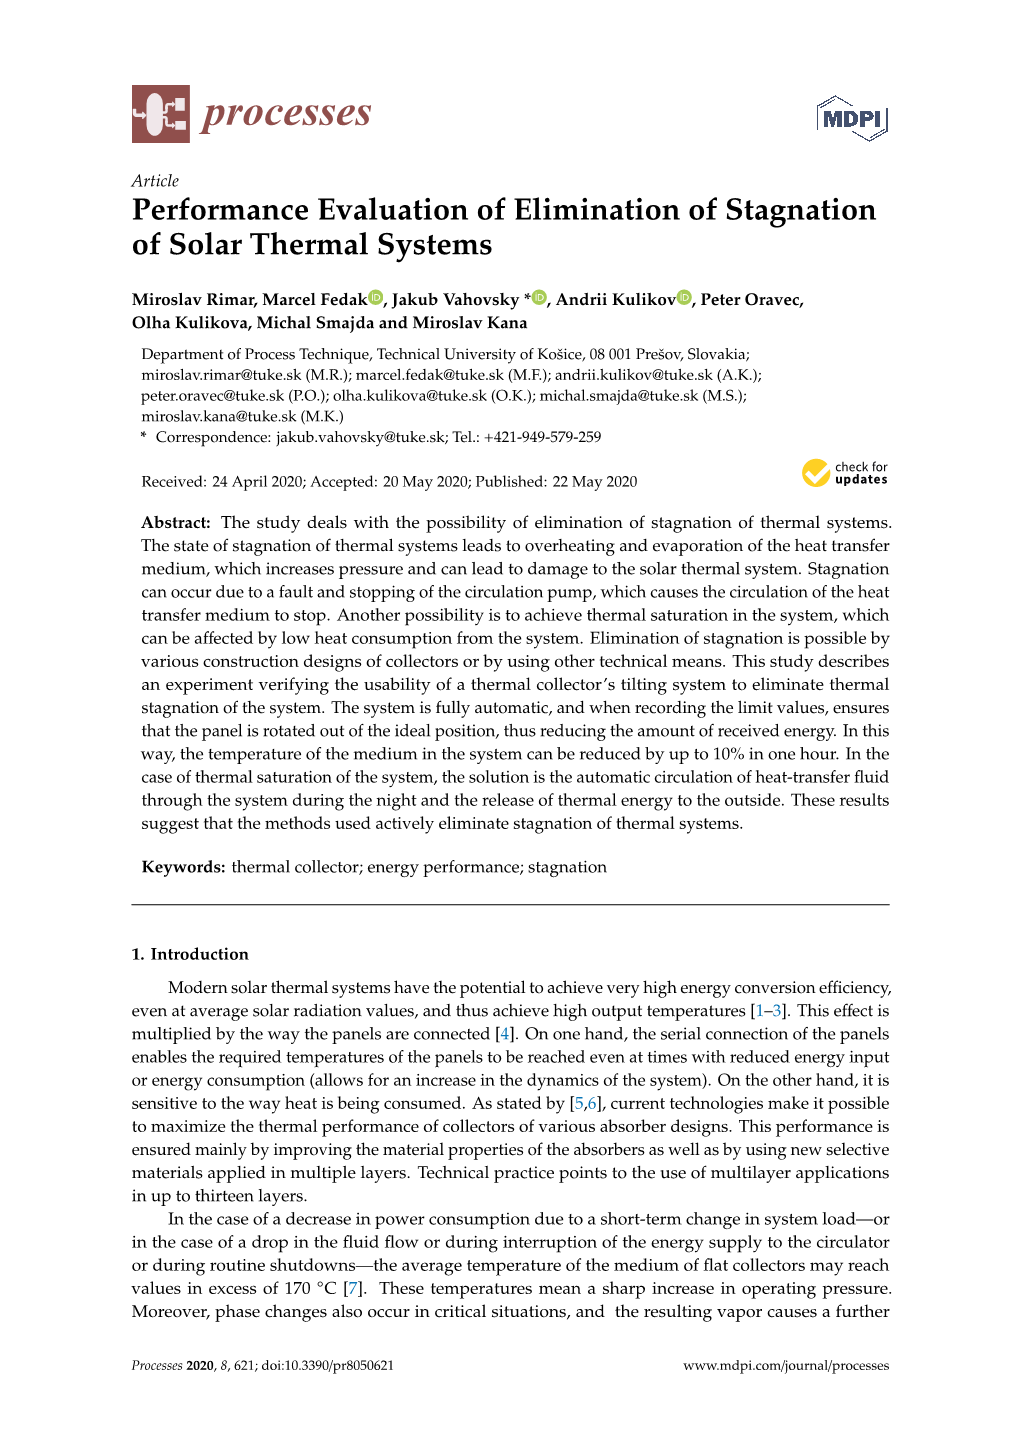 Performance Evaluation of Elimination of Stagnation of Solar Thermal Systems